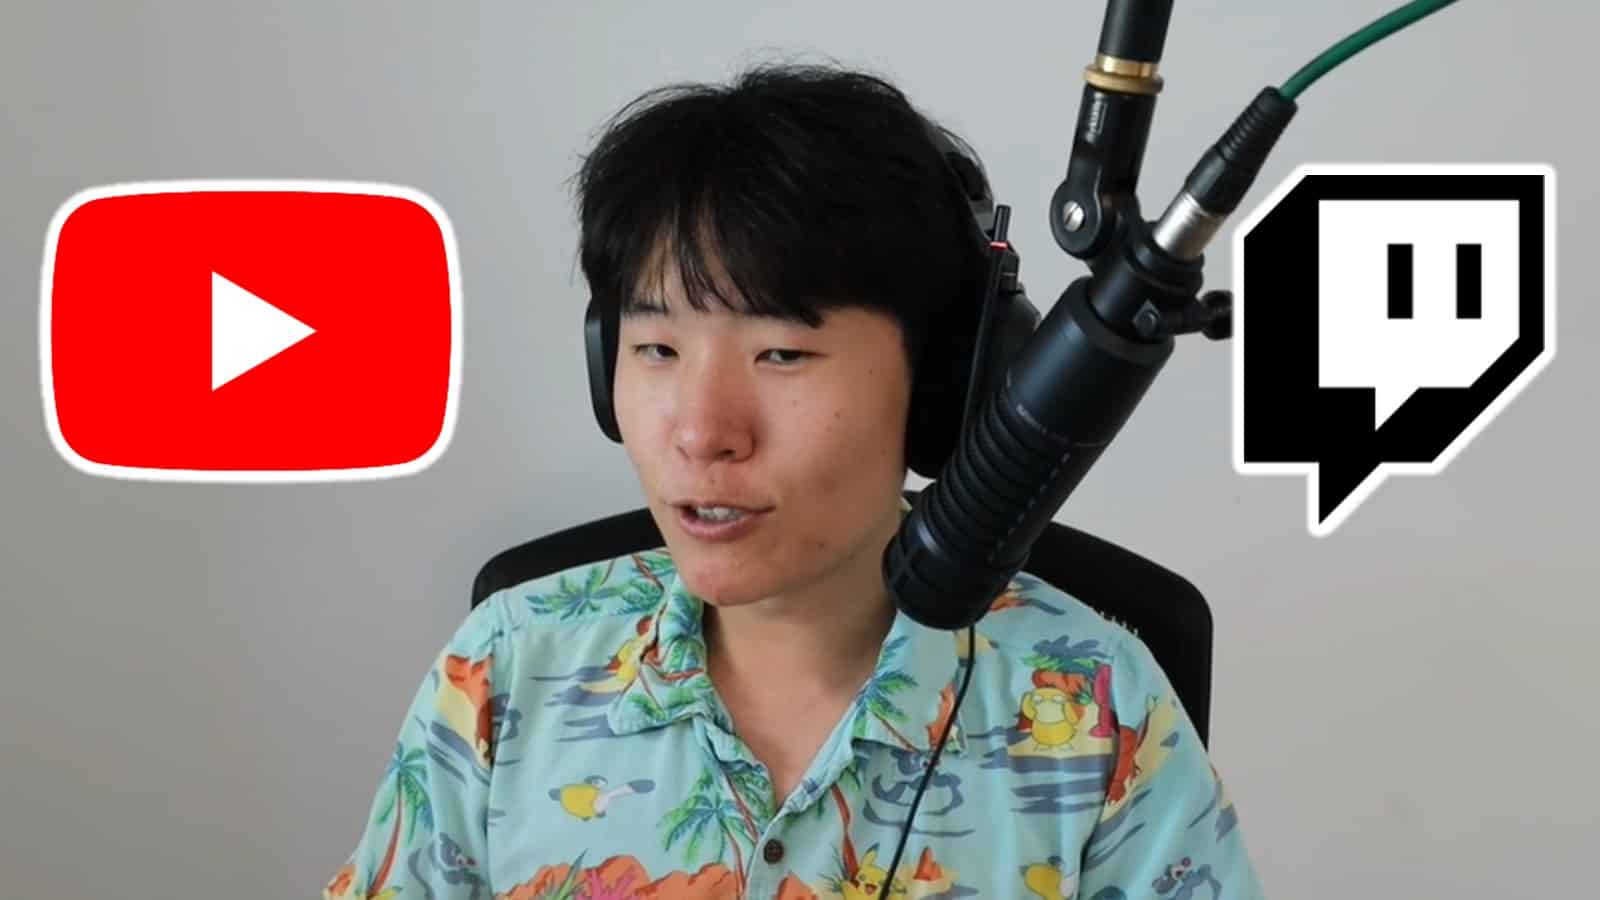 Twitch streamer Disguised Toast with Twitch and YouTube logos